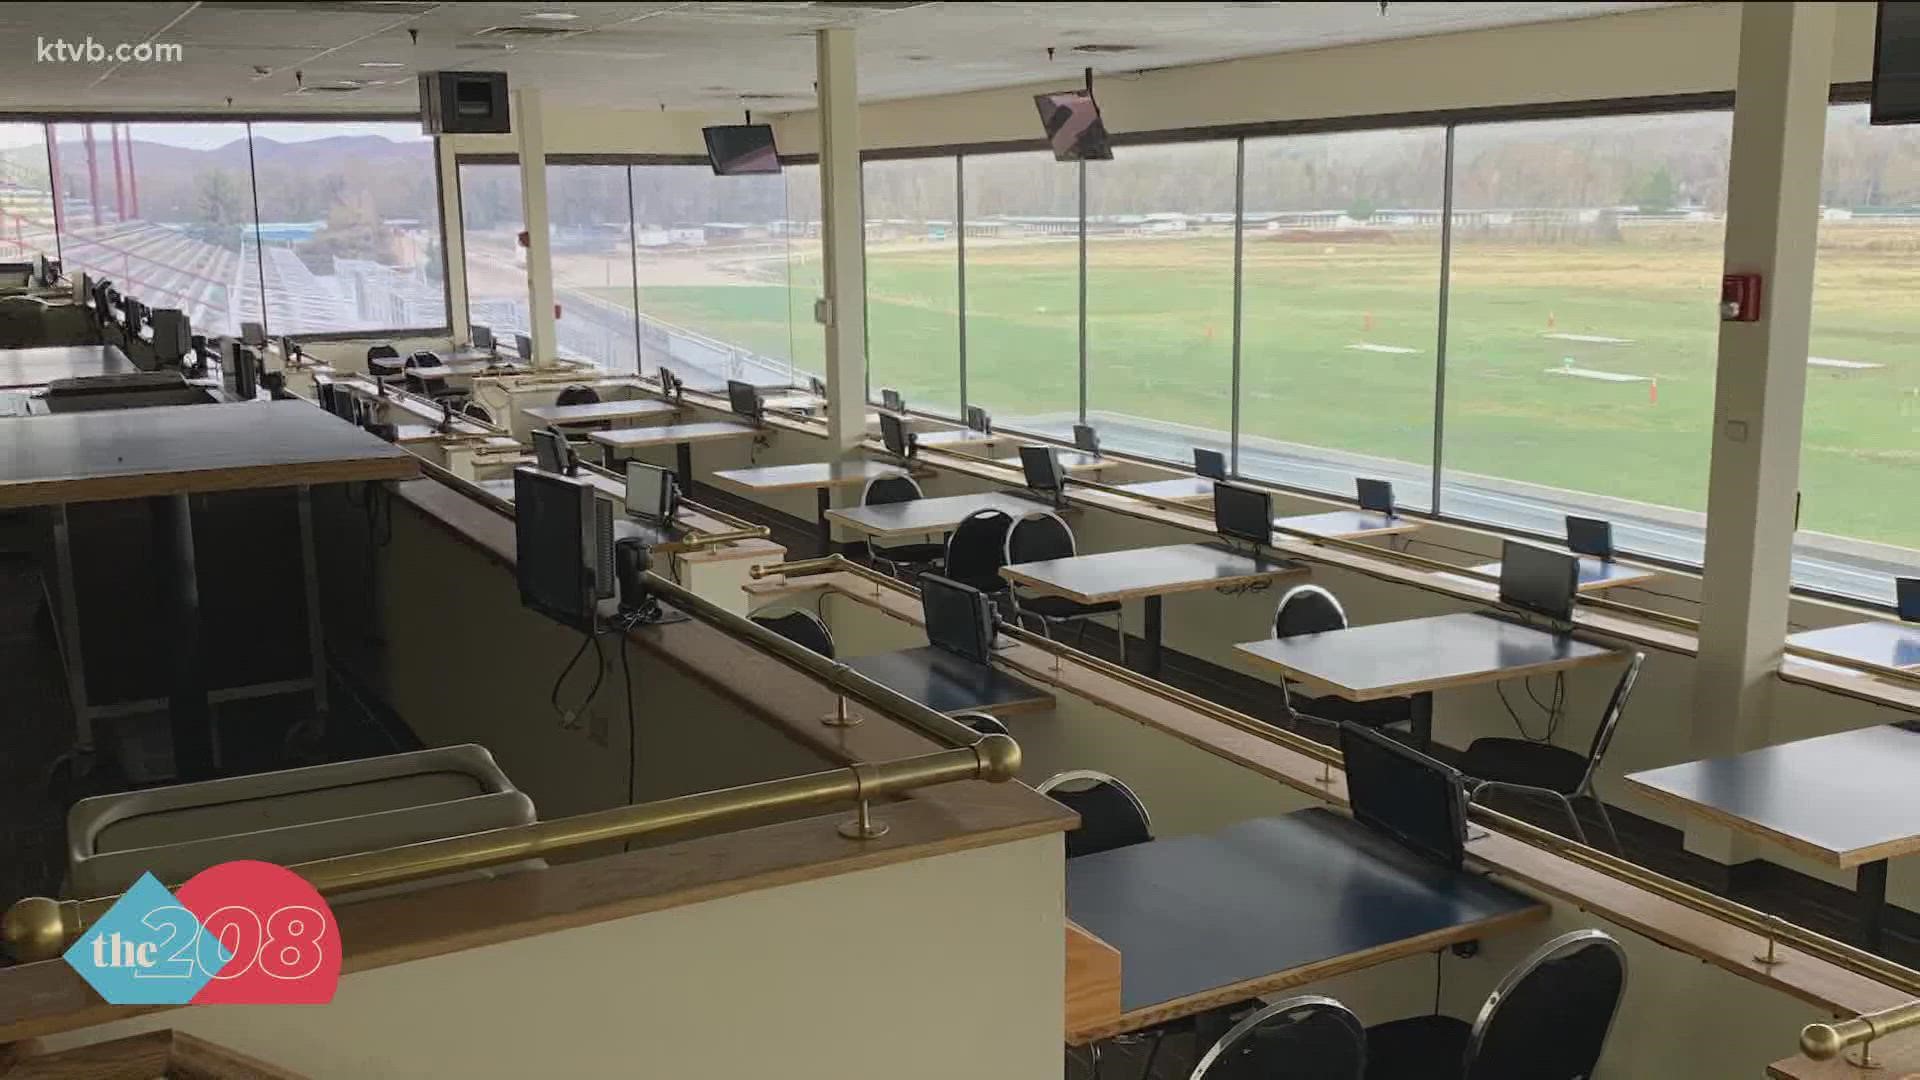 The Turf Club at Expo Idaho was used for betting on and simulcasting of horse races until Fall 2015.